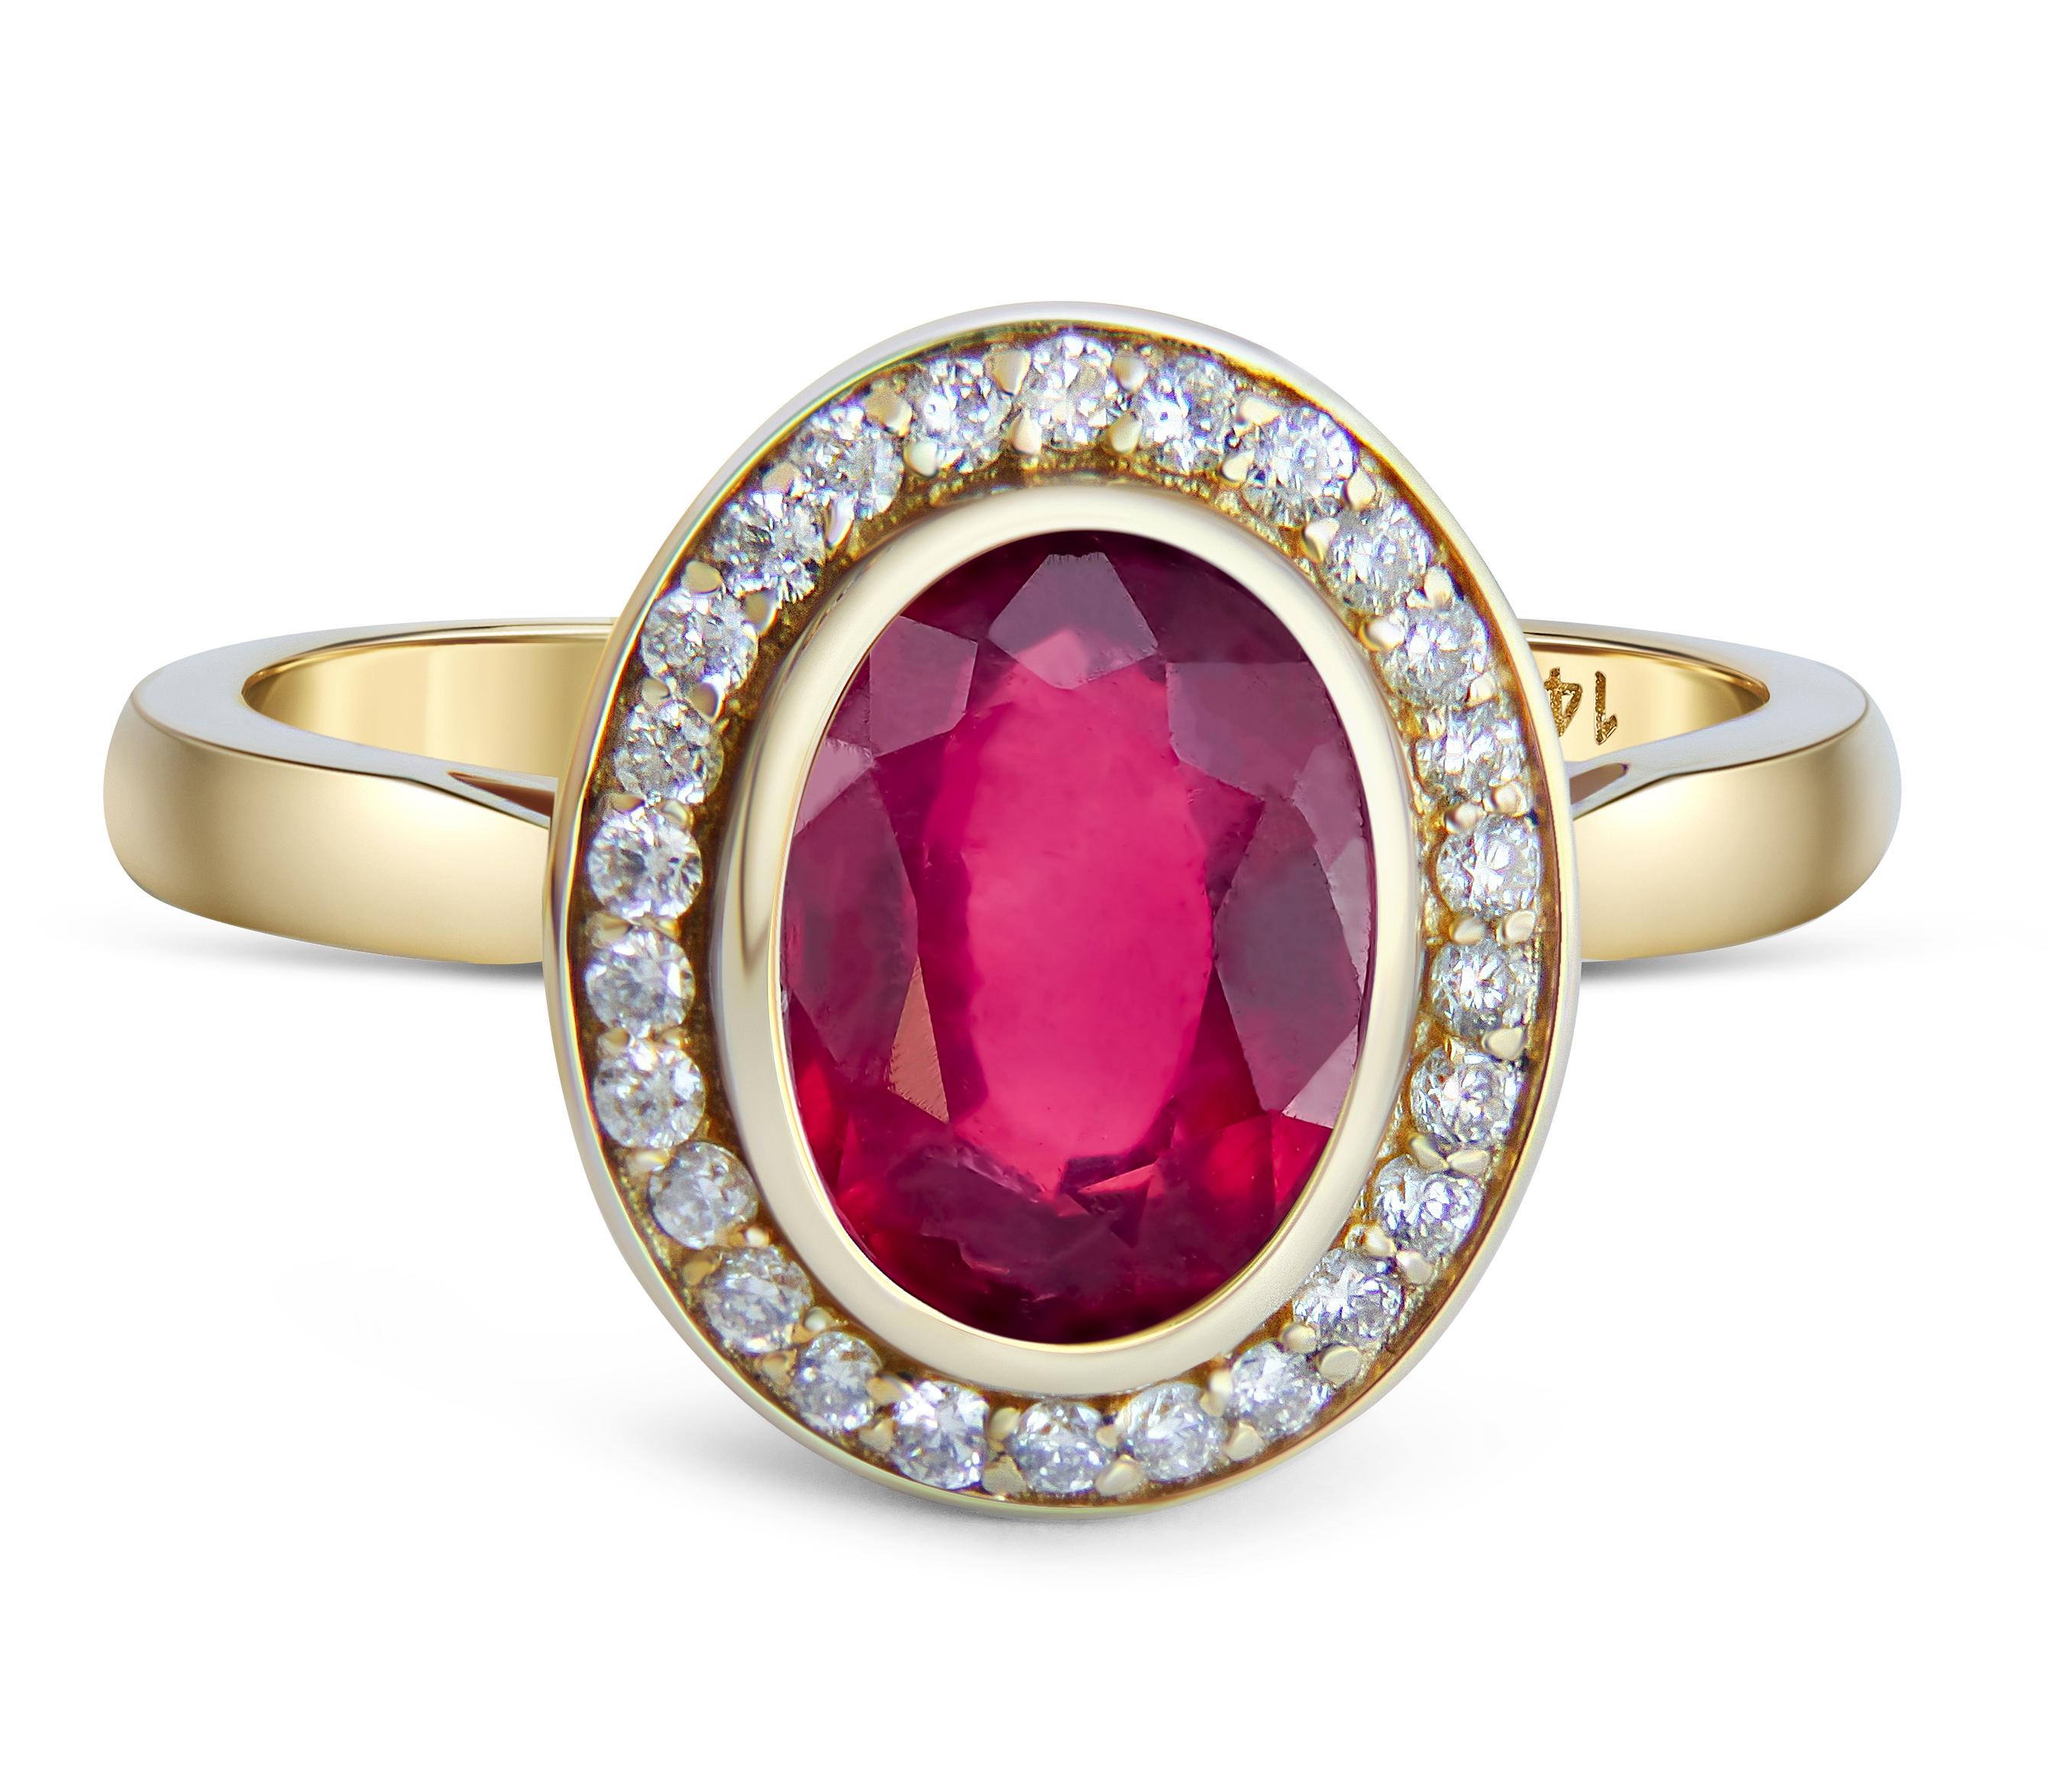 Ruby and diamonds 14k gold ring. 
Oval Ruby gold ring. Ruby diamond halo ring. Red gemstone ring. July birthstone ring.

Metal: 14k gold
Weight: 3 gr depends from size

Gemstones:
Ruby - 1 piece
Cut - oval
Color - red
Weight - 1 ct

Side gemstones -